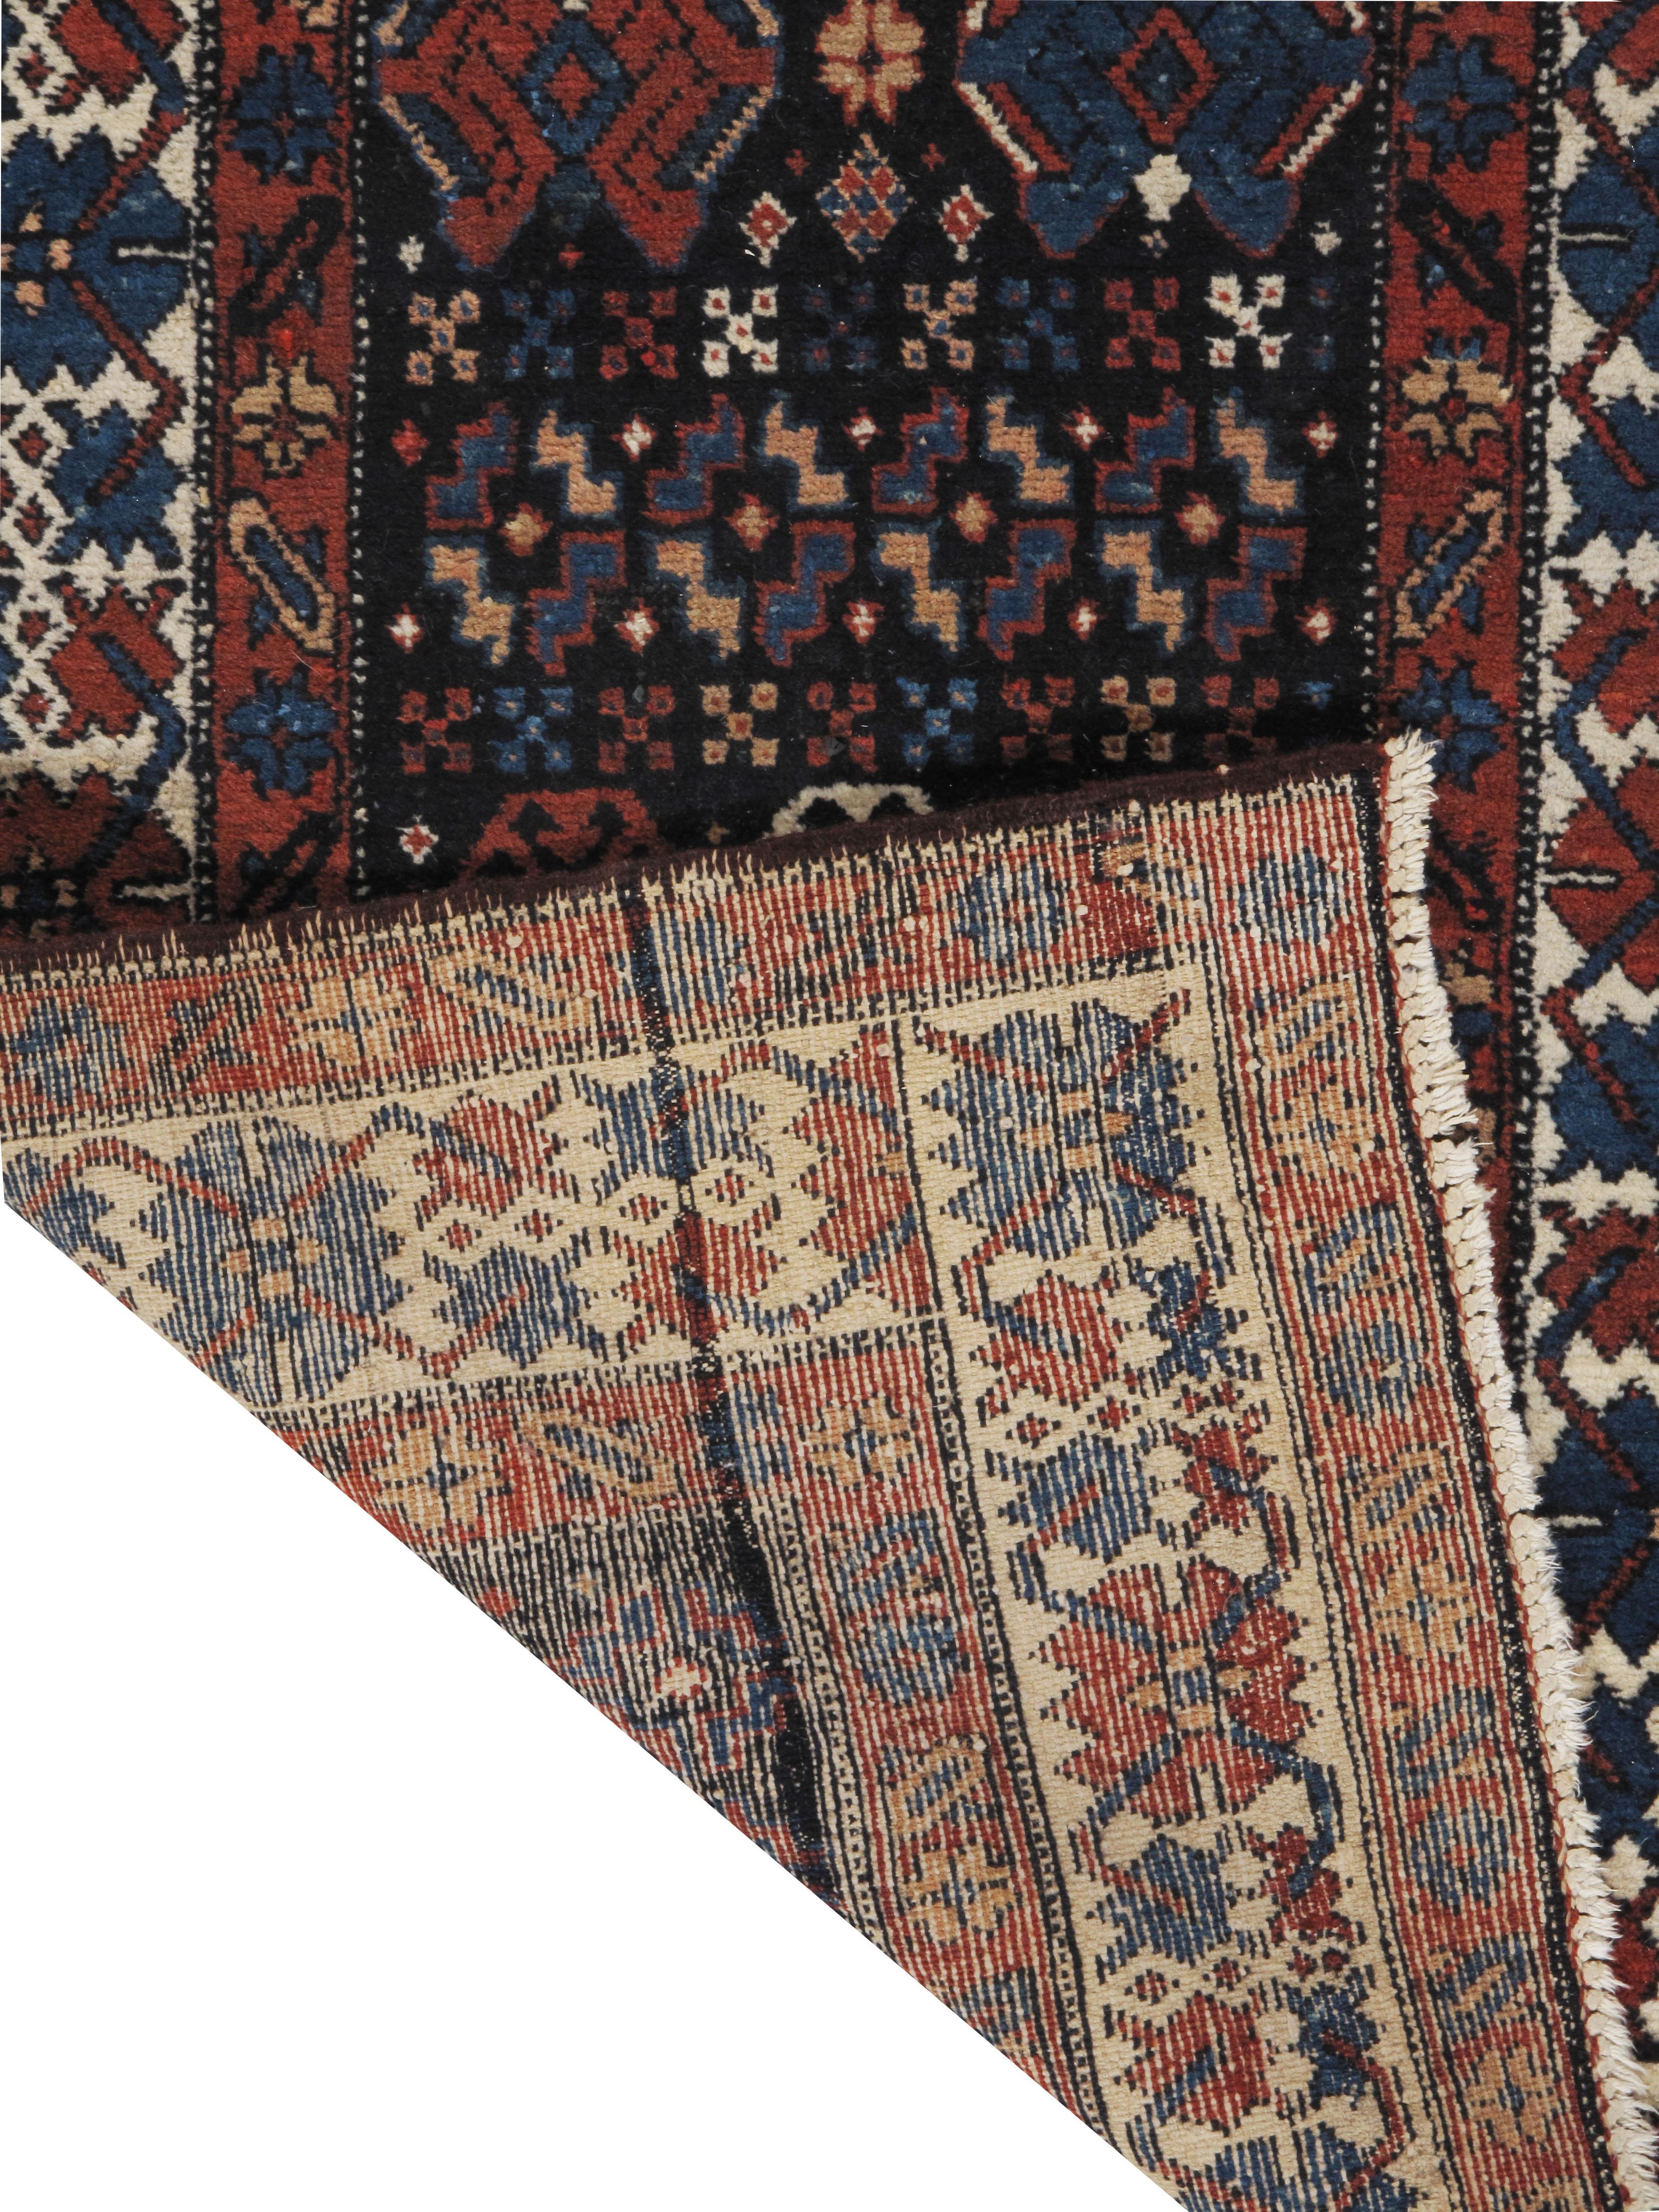 Wool Antique N.W. Persian Runner 2'9 x 12'11 For Sale